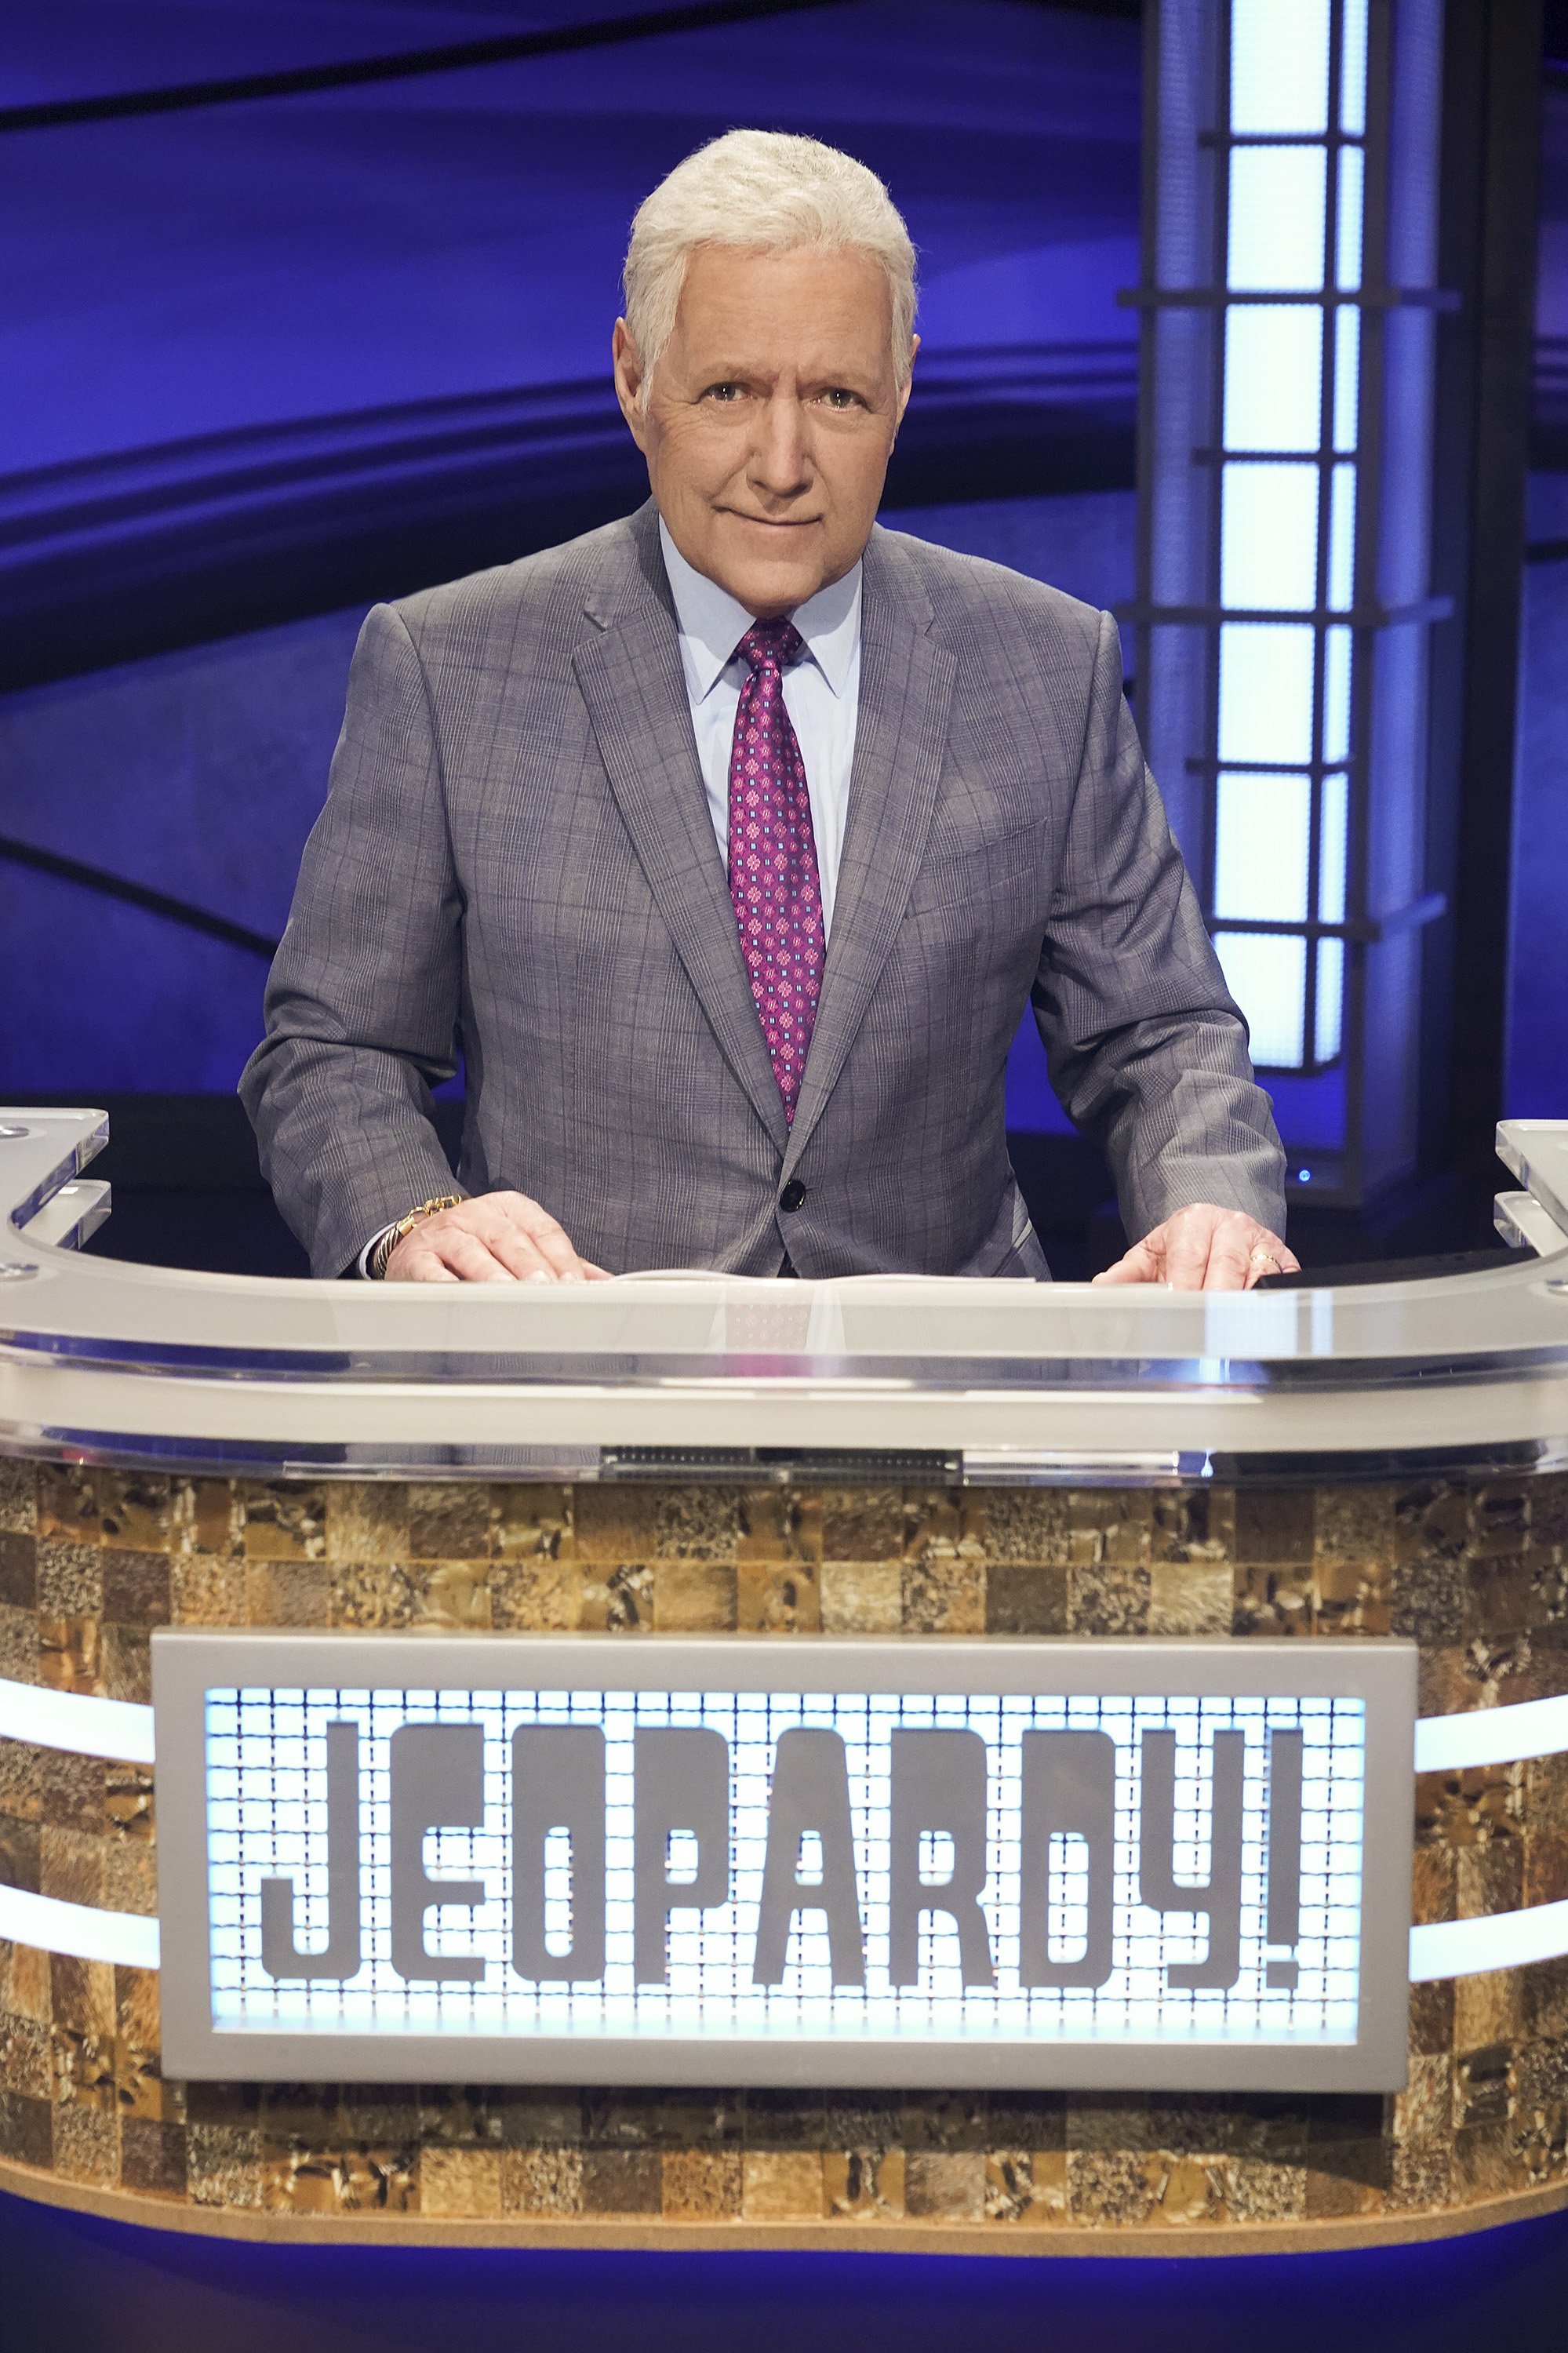 Alex Trebek onstage during the "Jeopardy!" game show | Photo: Getty Images